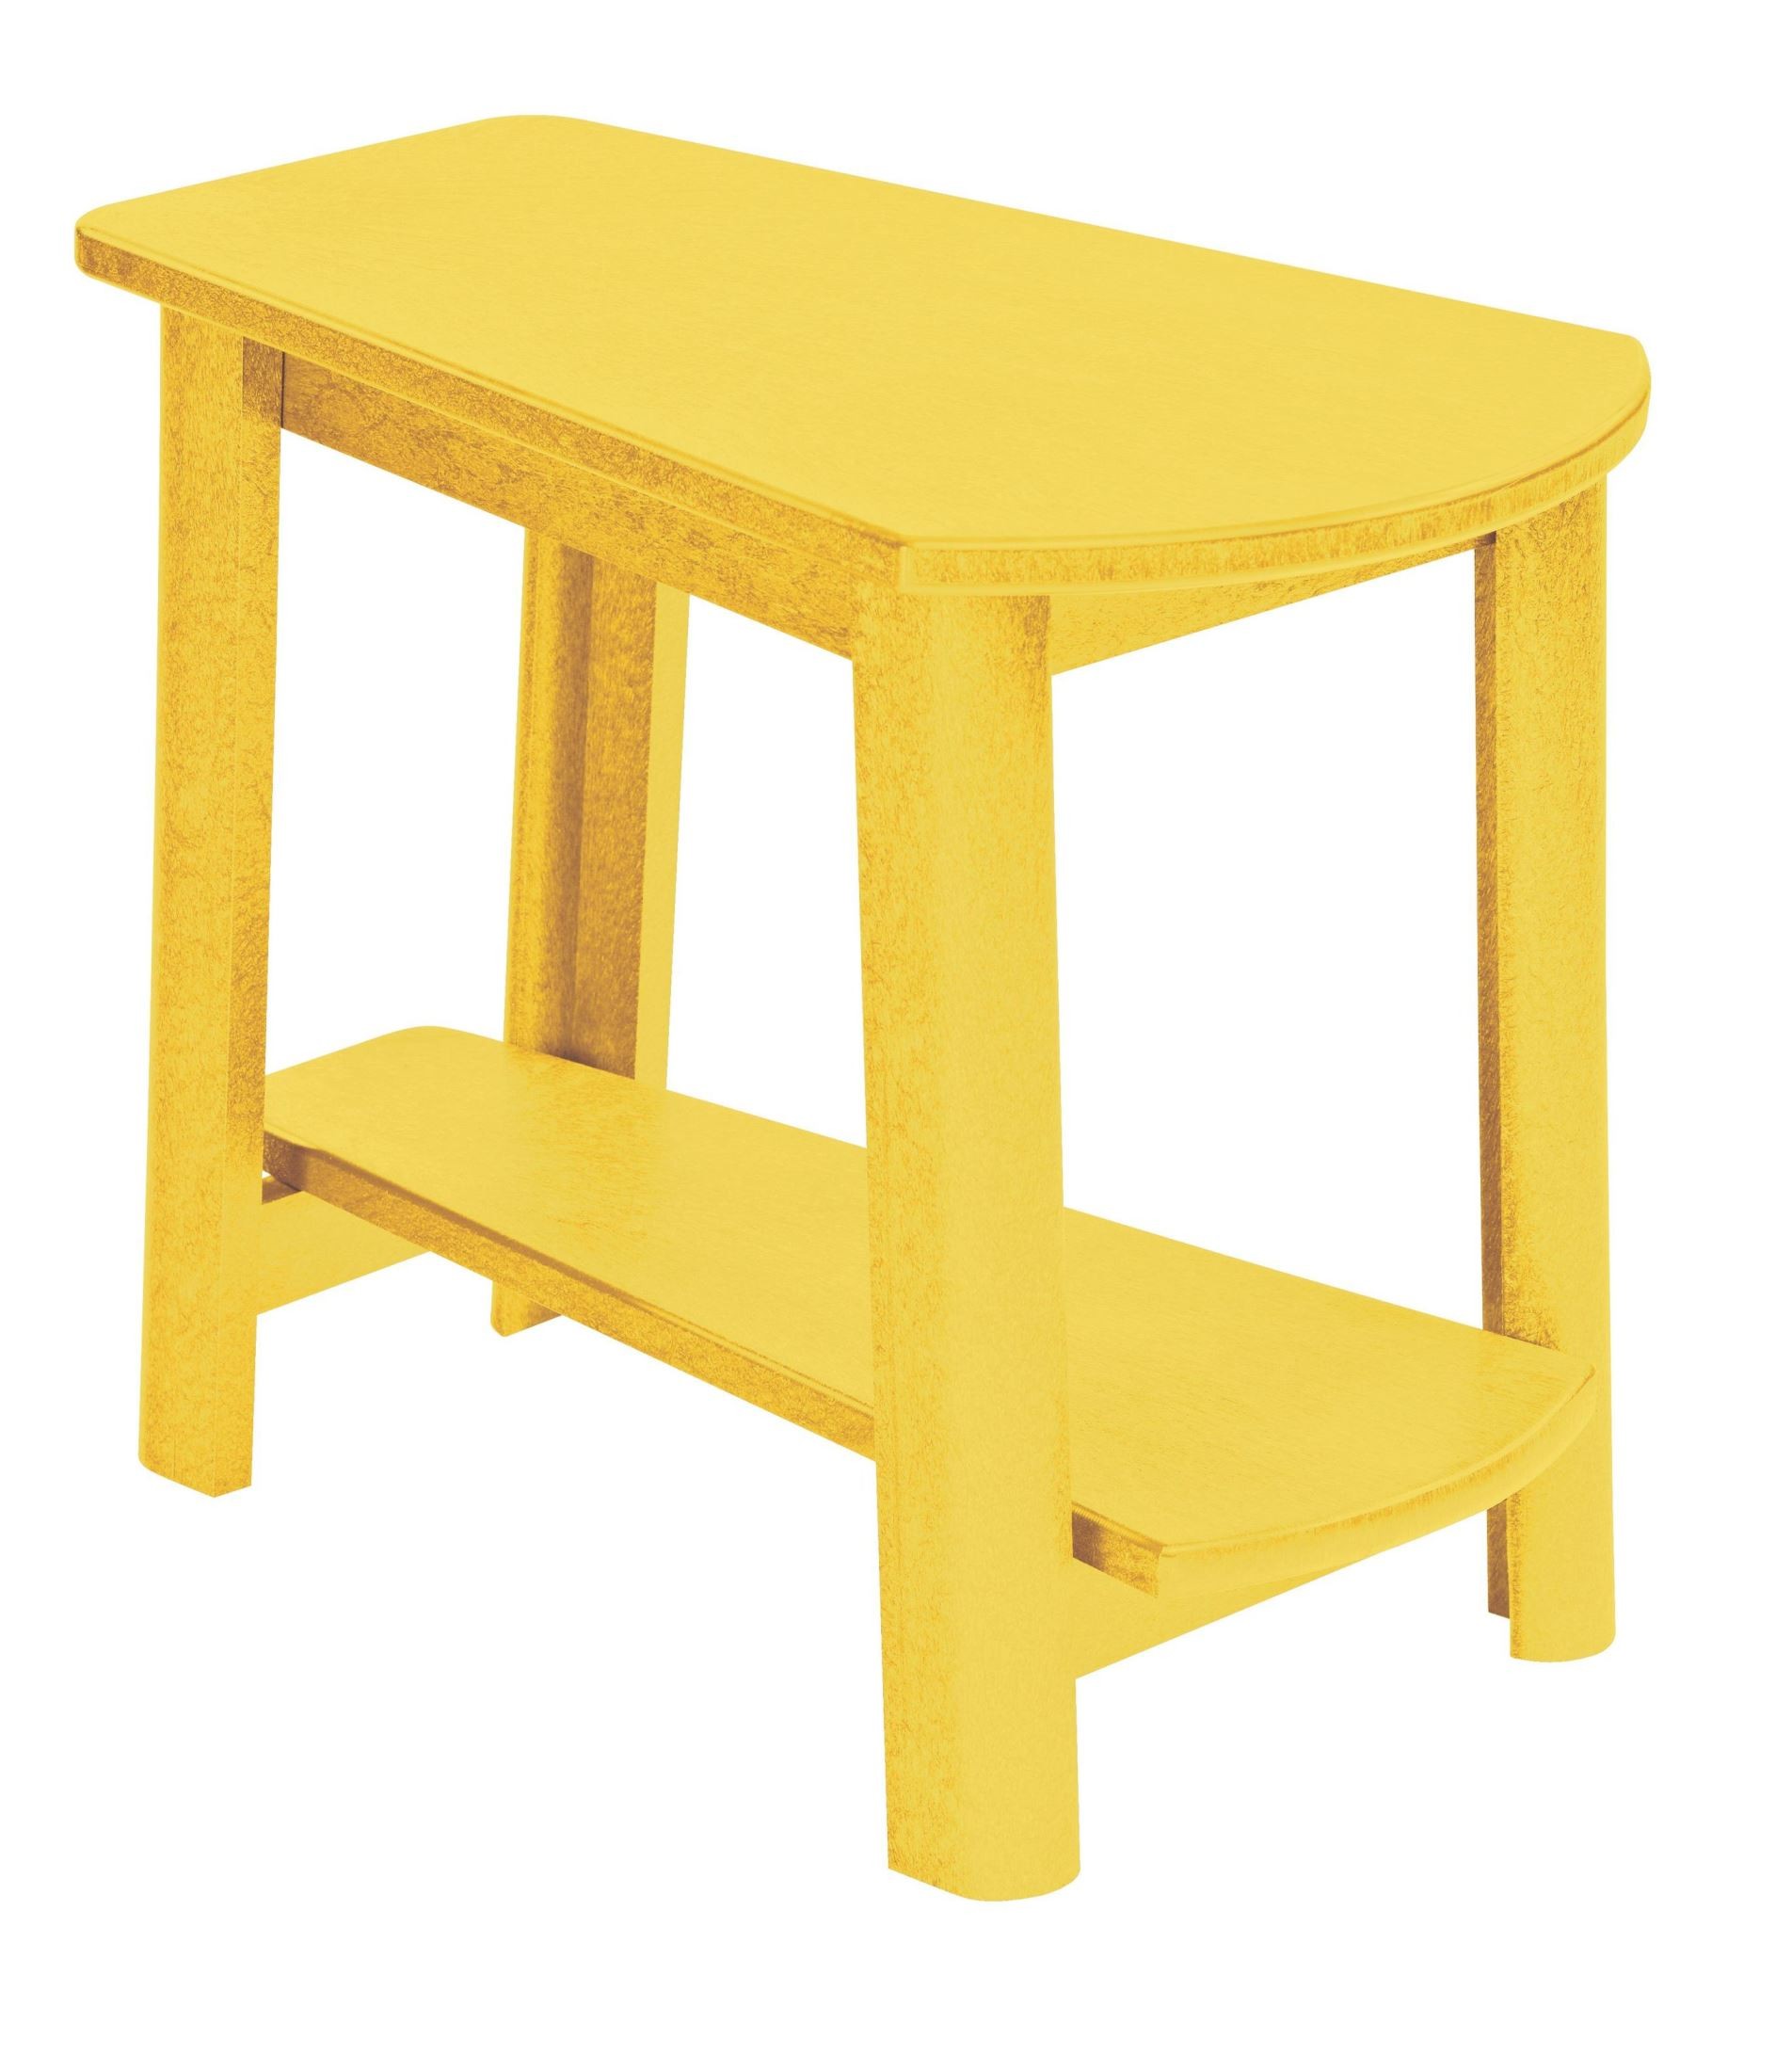 generations yellow tapered accent table from plastic silver outdoor distressed farmhouse and chairs reclaimed wood round side target makeup vanity narrow console with shelves